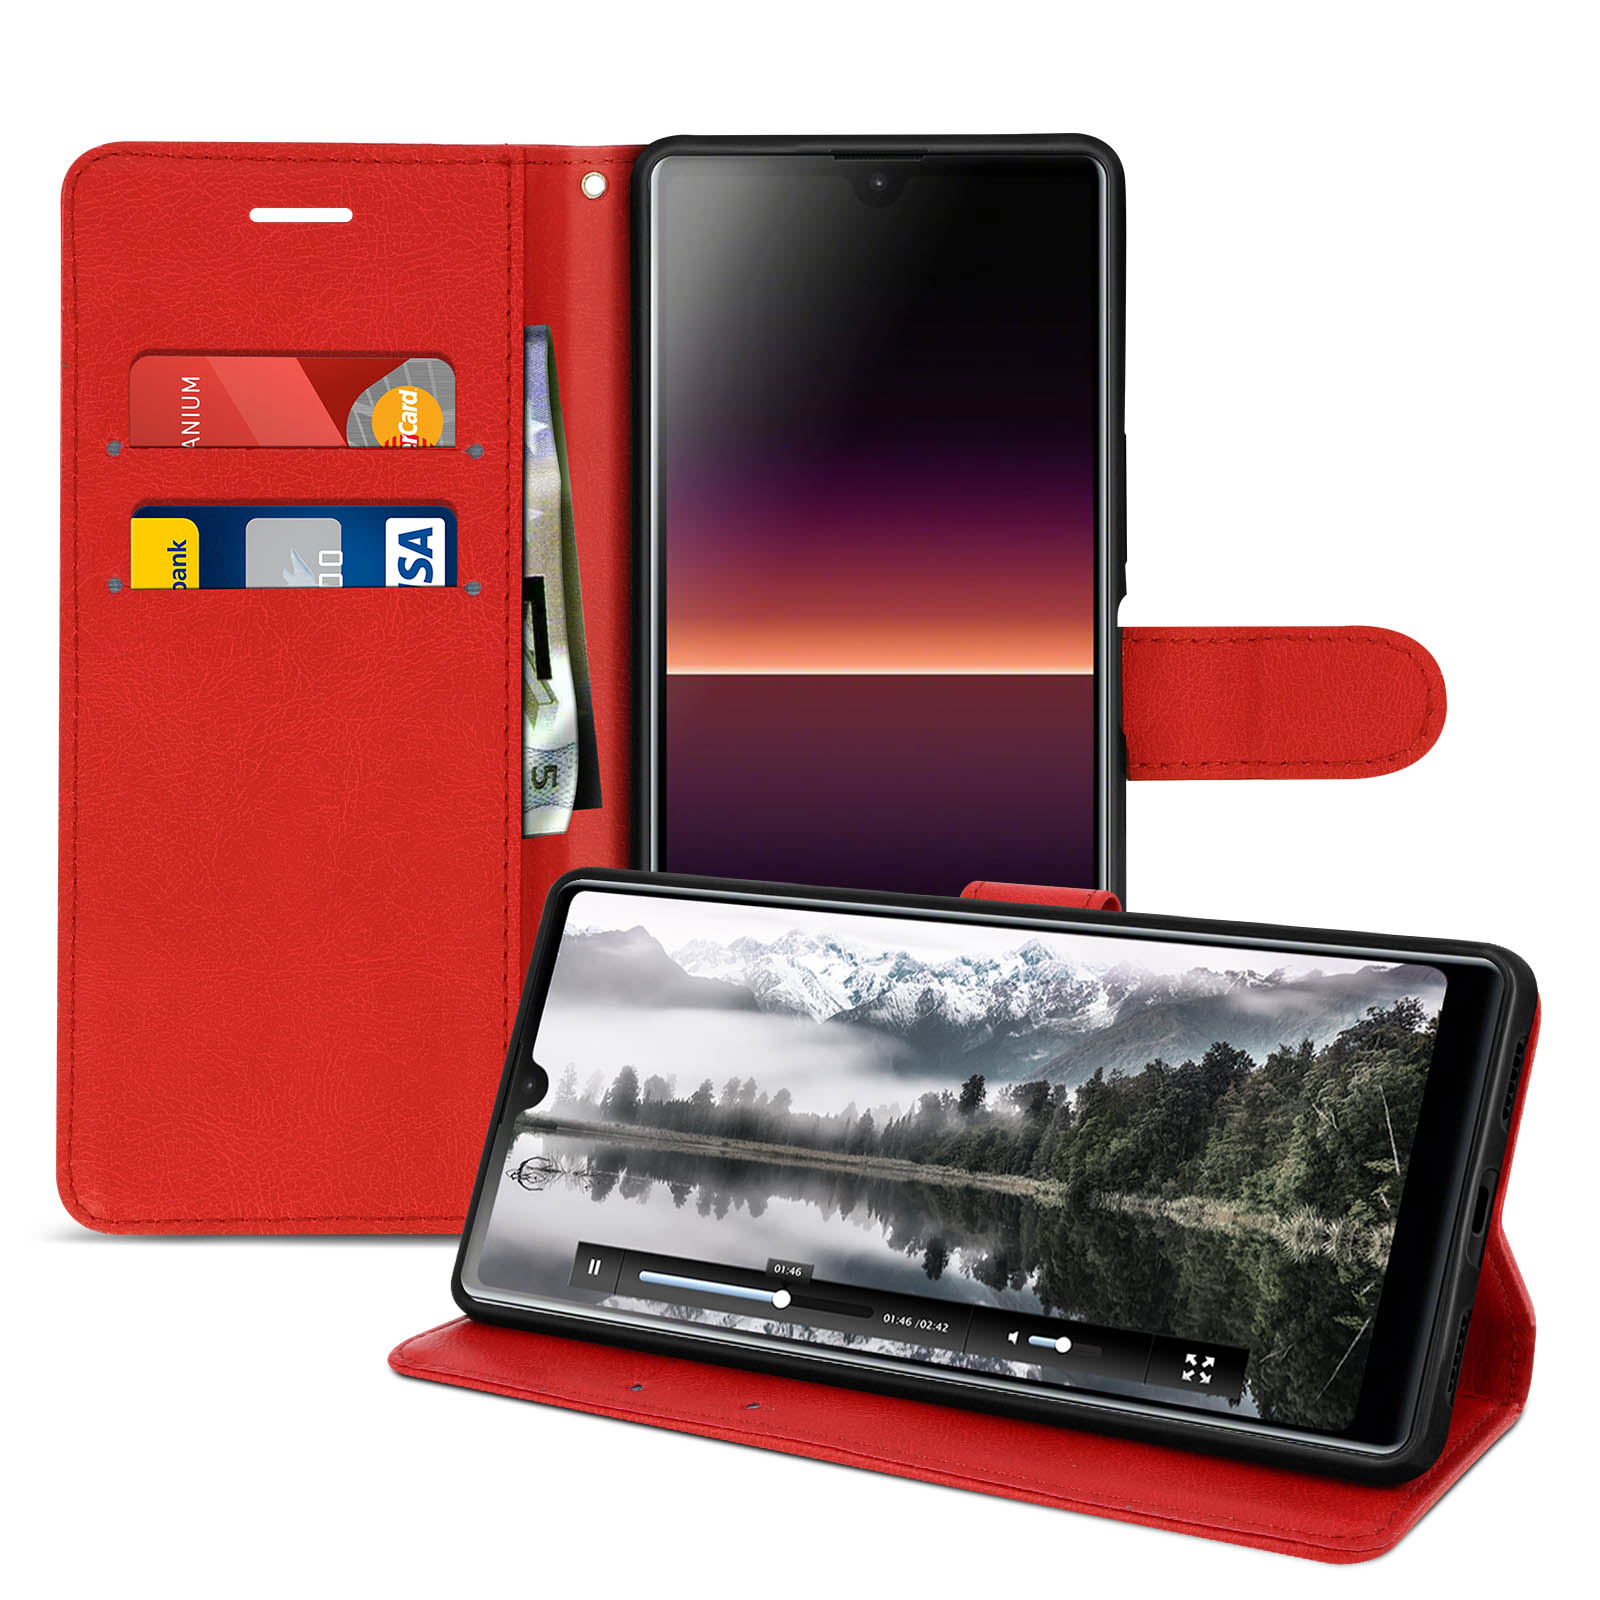 Series, L4, Trageschlaufe Rot Bookcover, Xperia AVIZAR Sony,